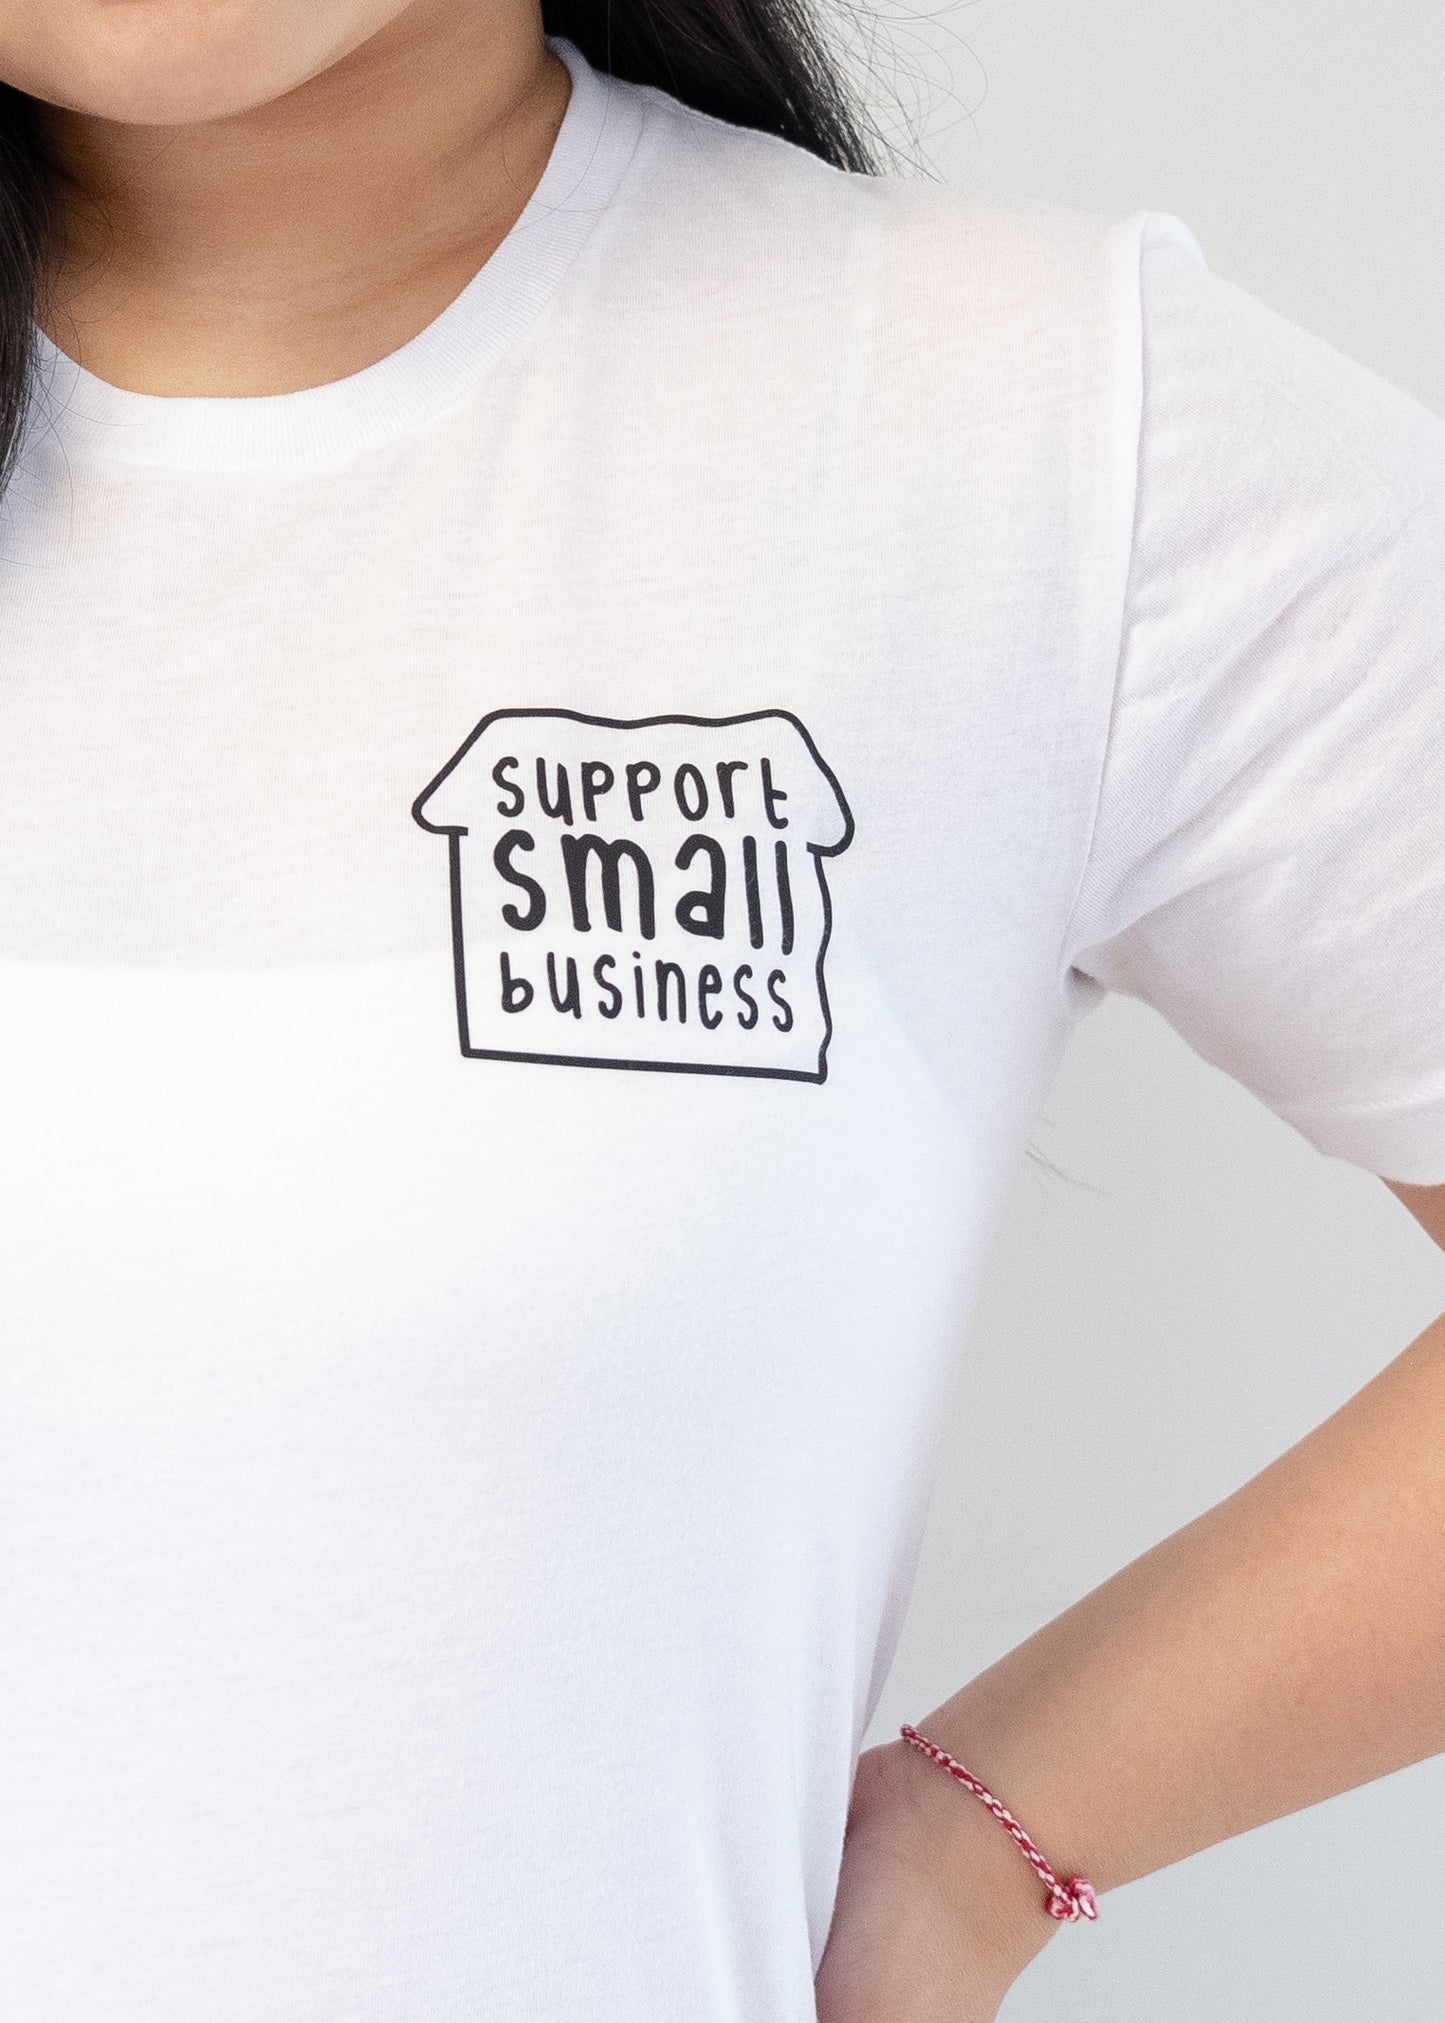 Support Small Business Shirt or Sweatshirt